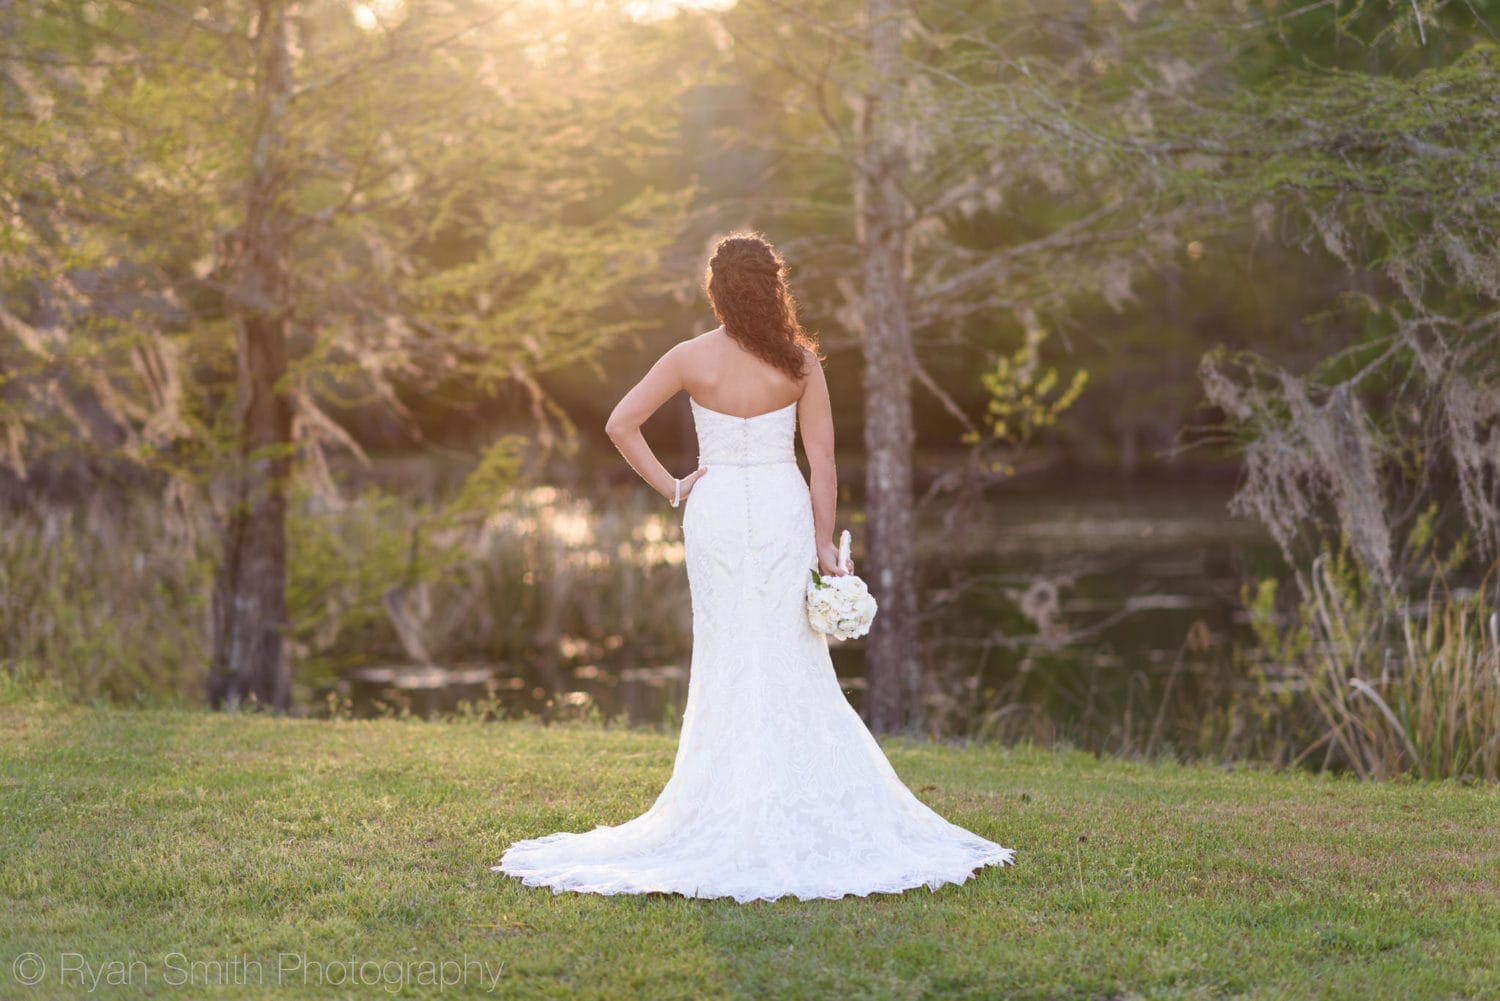 Bride looking out at the sunset - Upper Mill Plantation